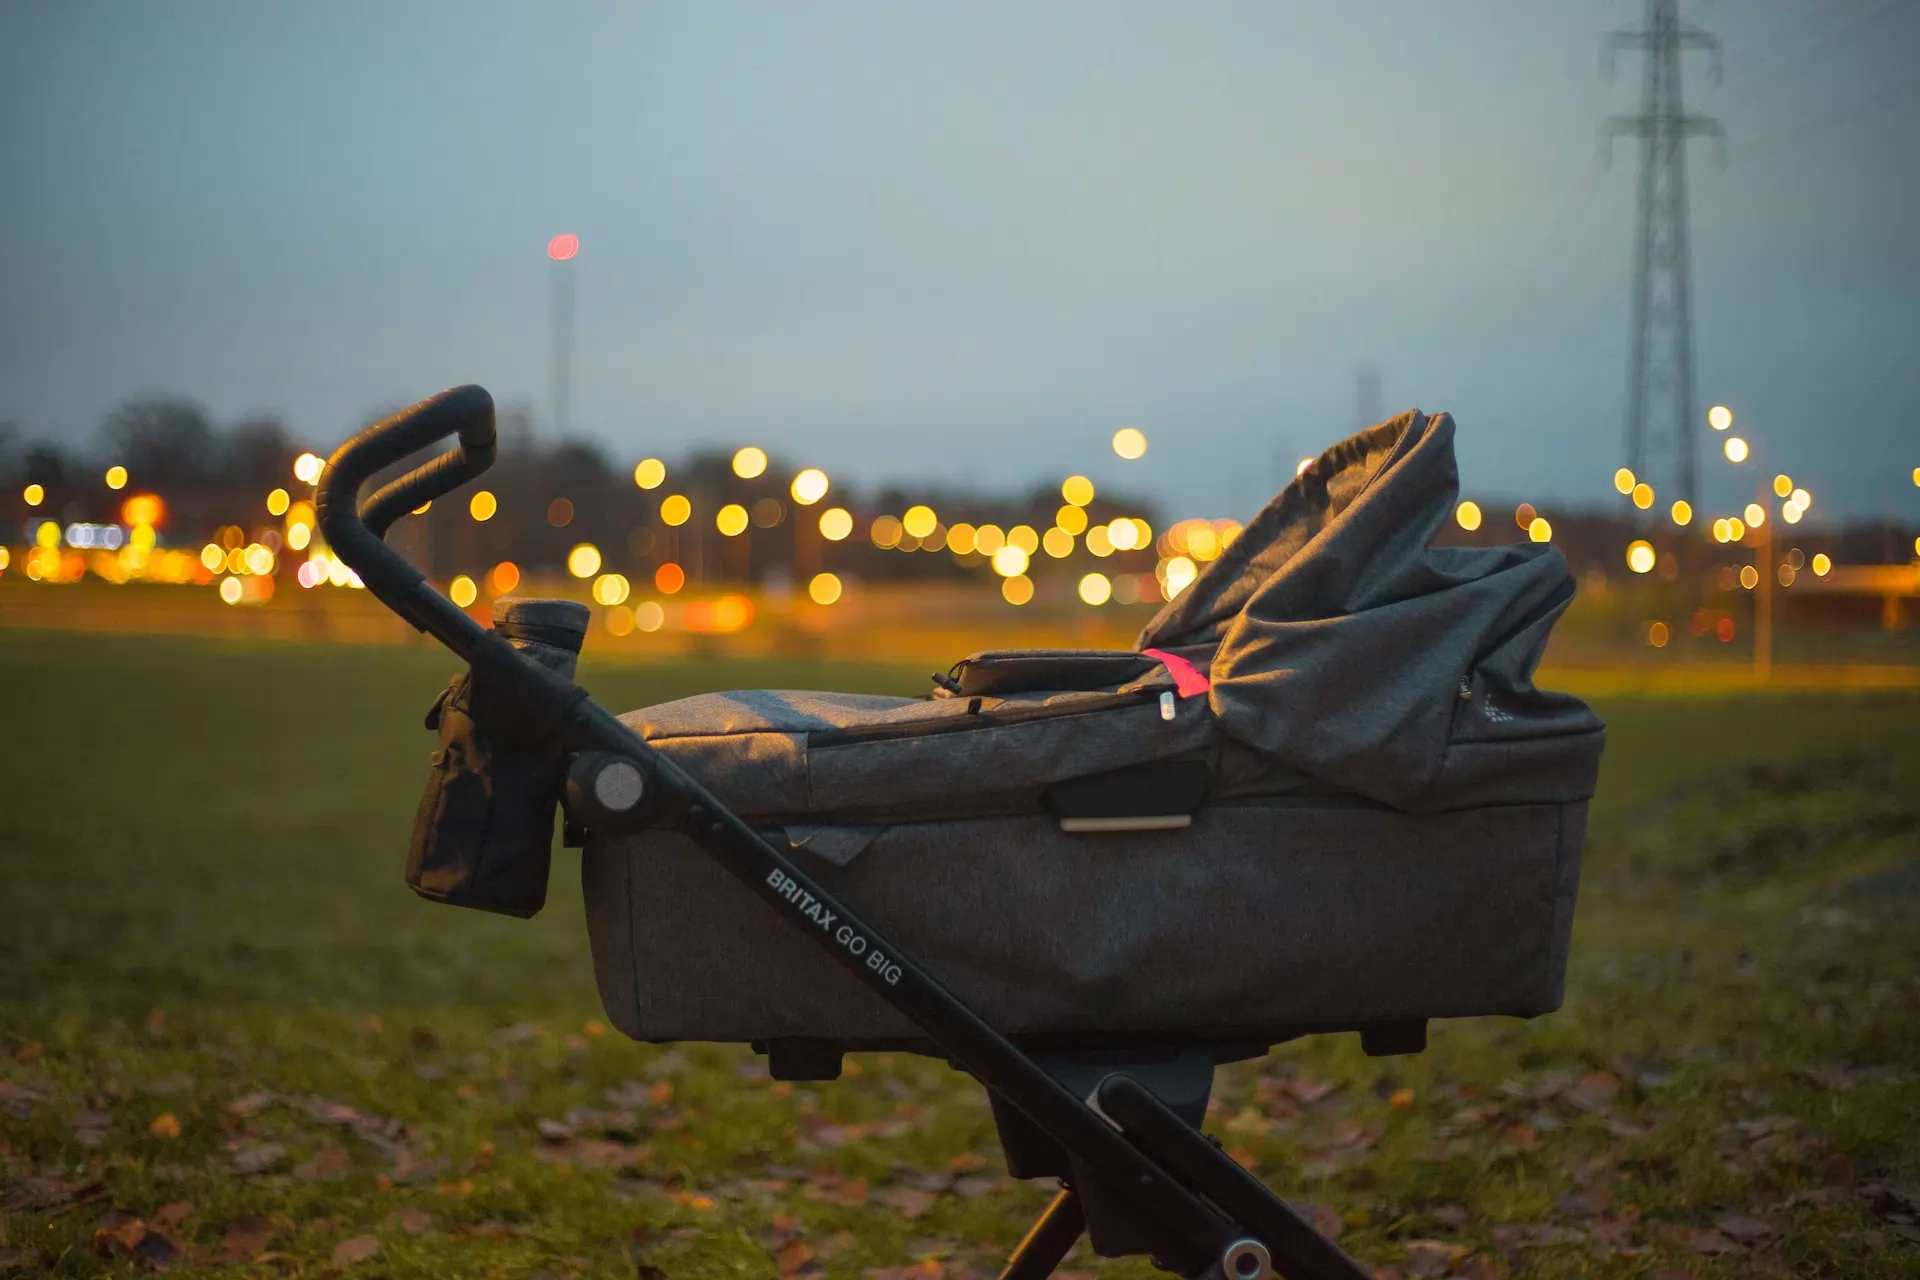 The market of strollers